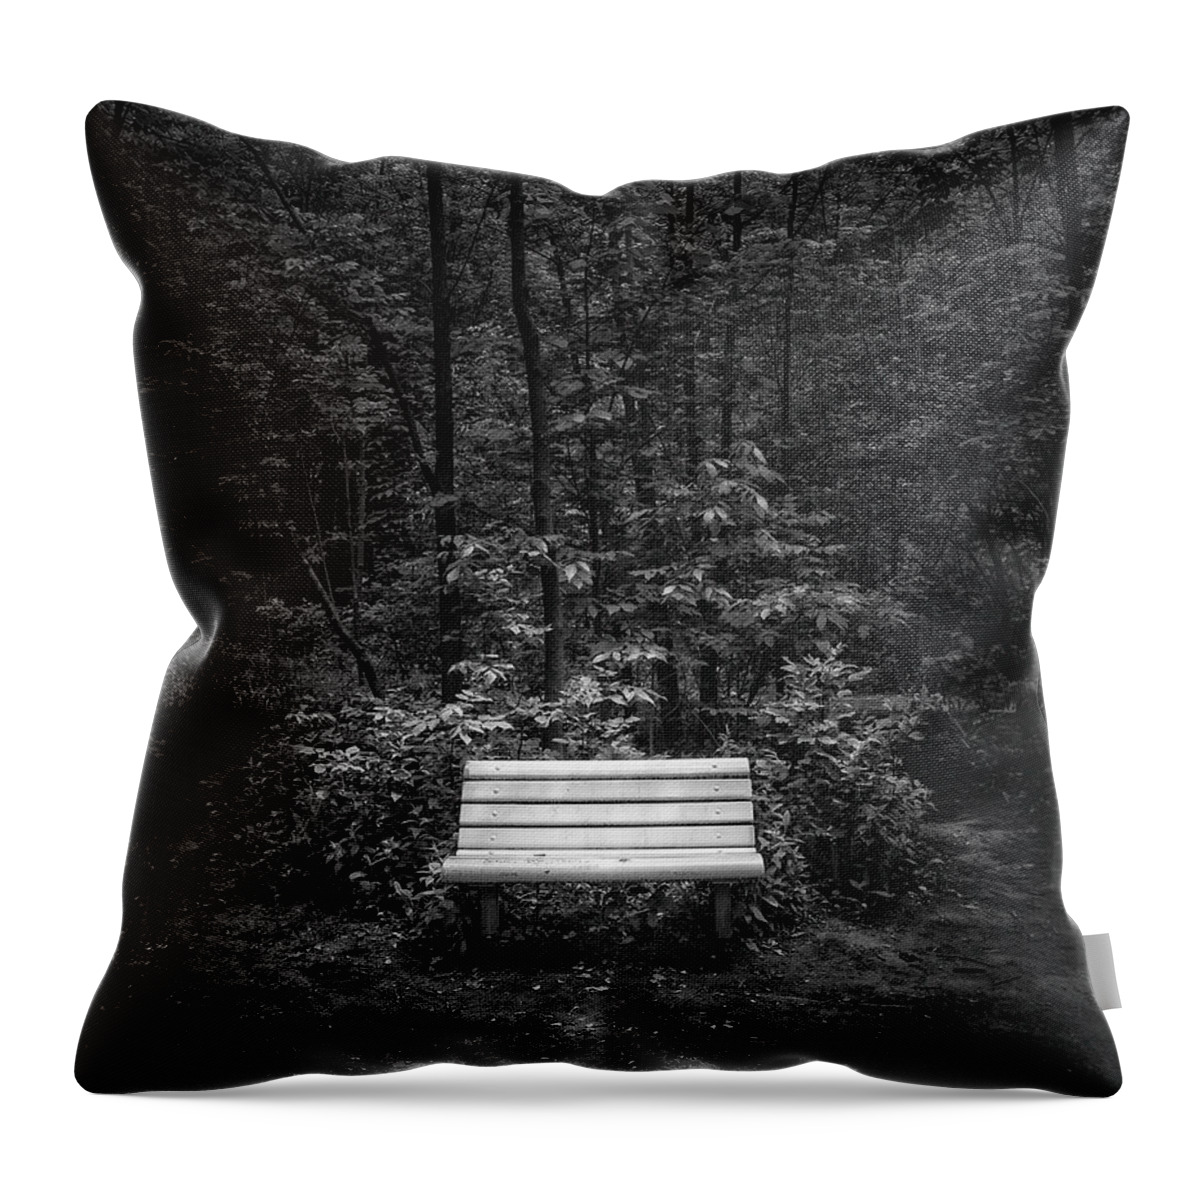 Black And White Throw Pillow featuring the photograph A Place to Sit by Scott Norris